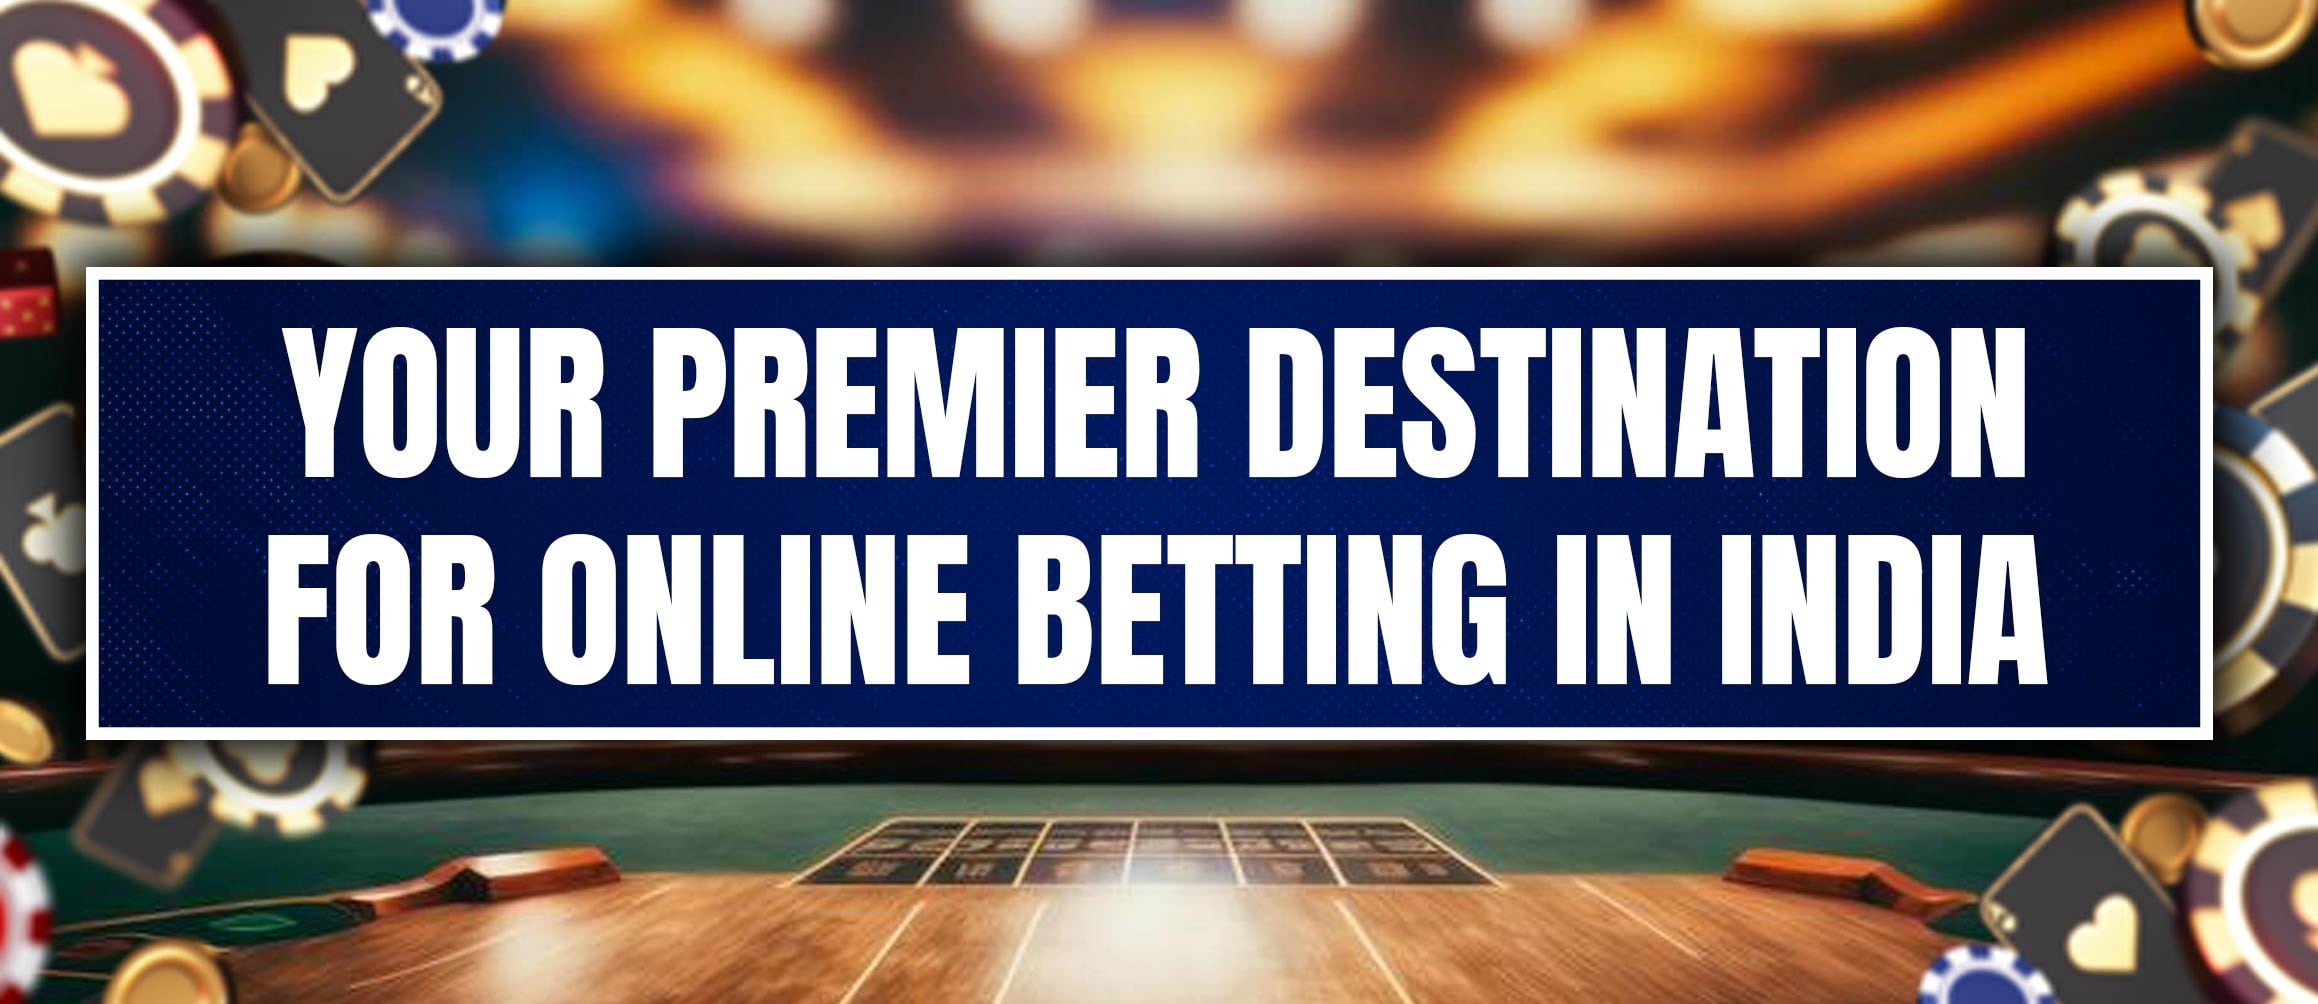 Flash Exchange: Your Premier Destination for Online Betting in India